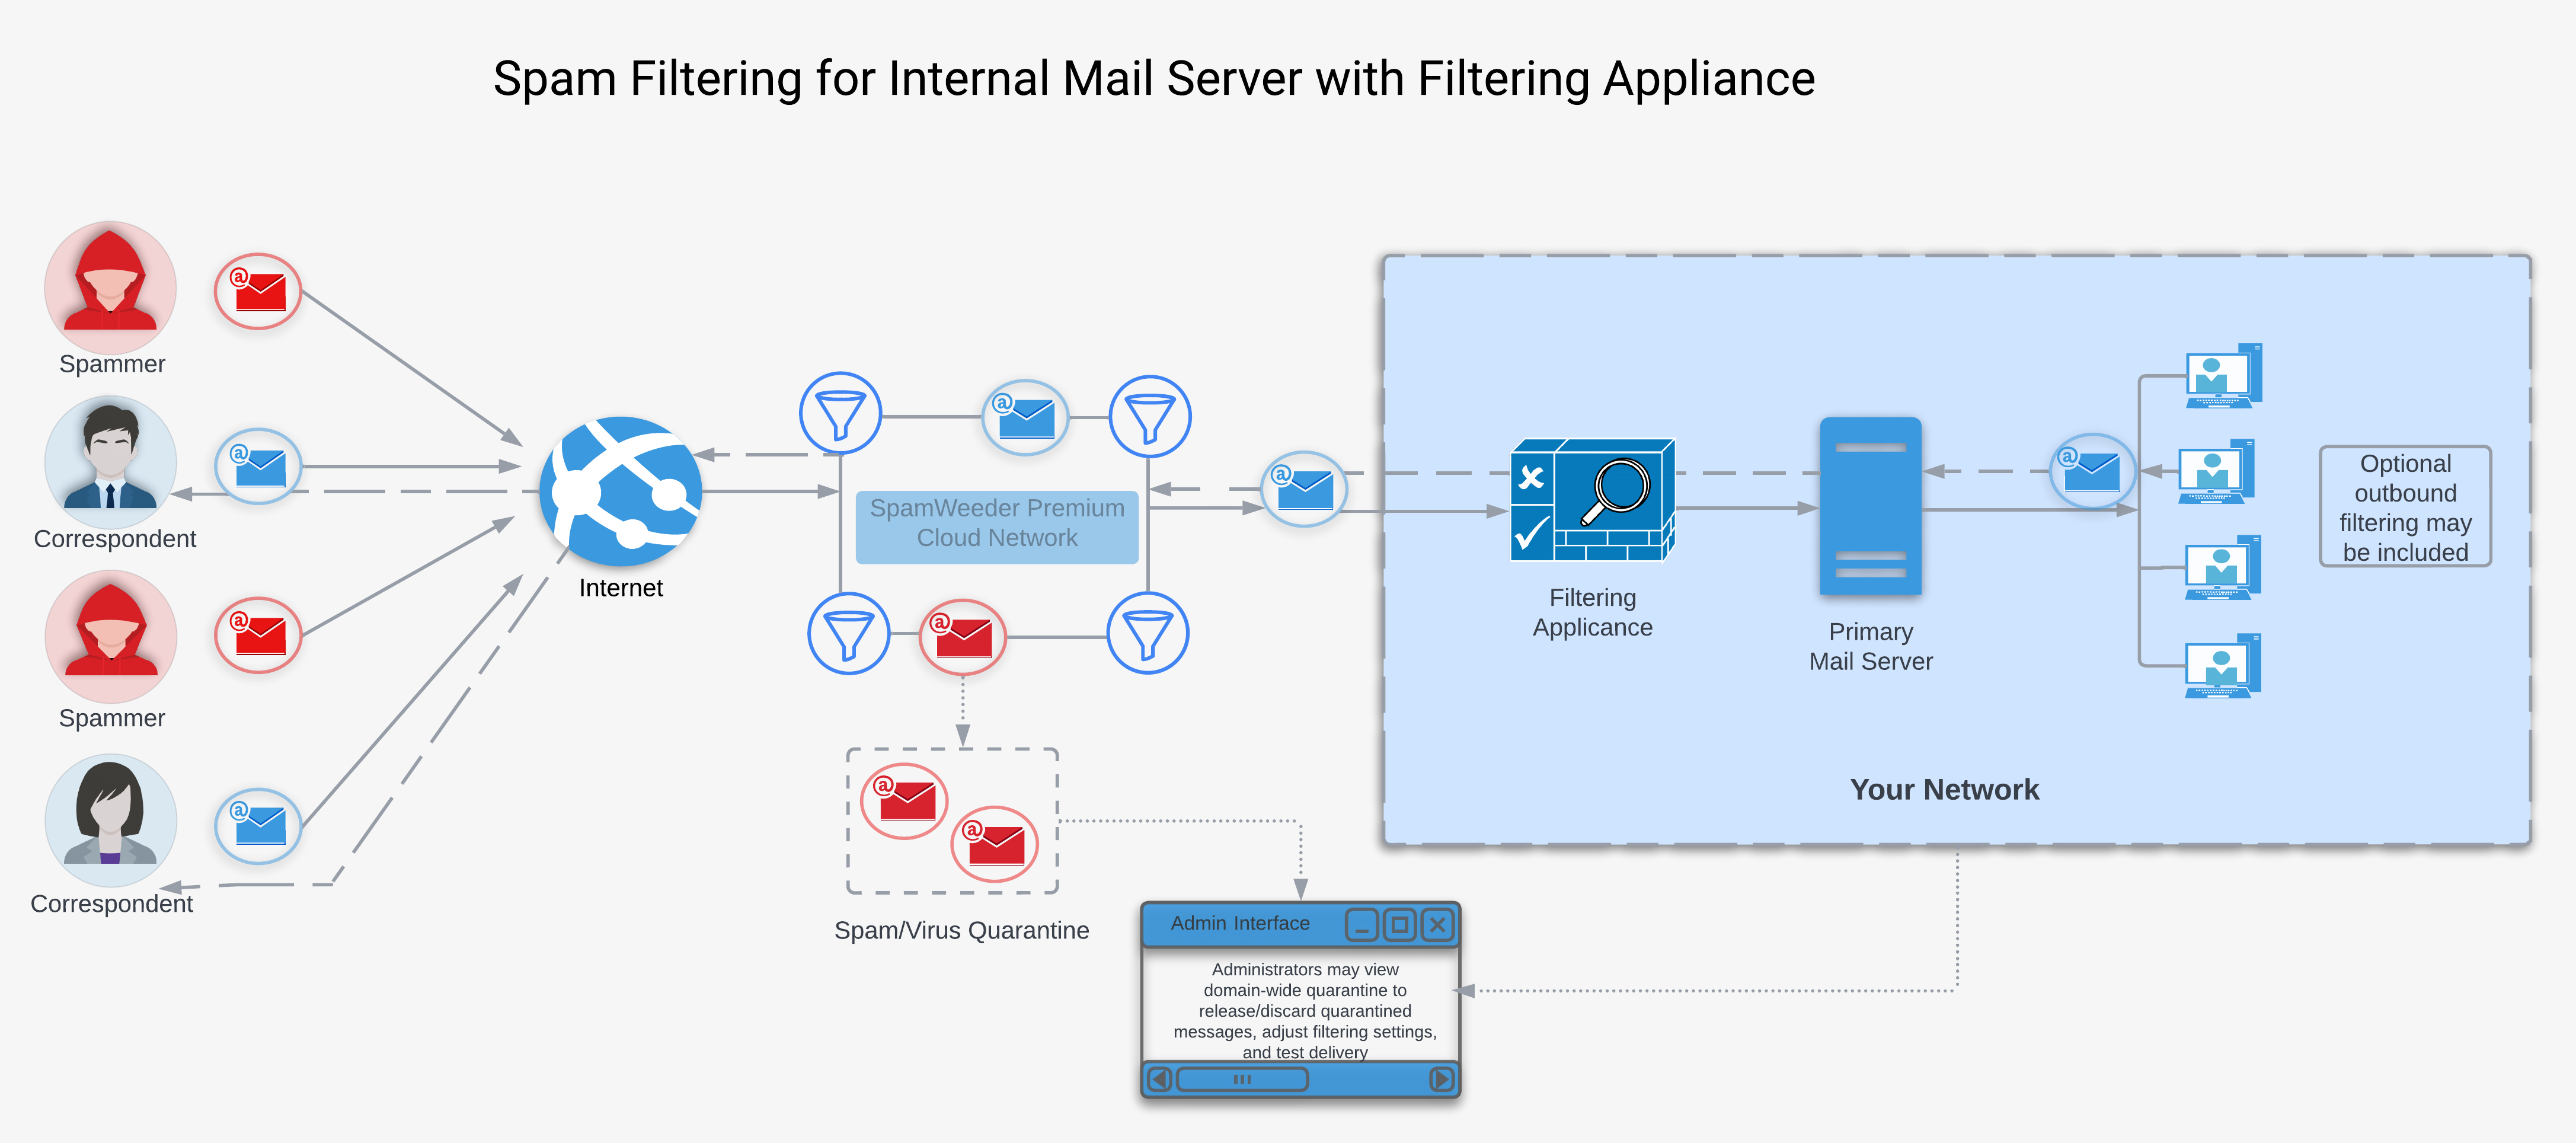 SpamWeeder Premium Solution for Internal Mail Servers with Internal Filtering Appliance